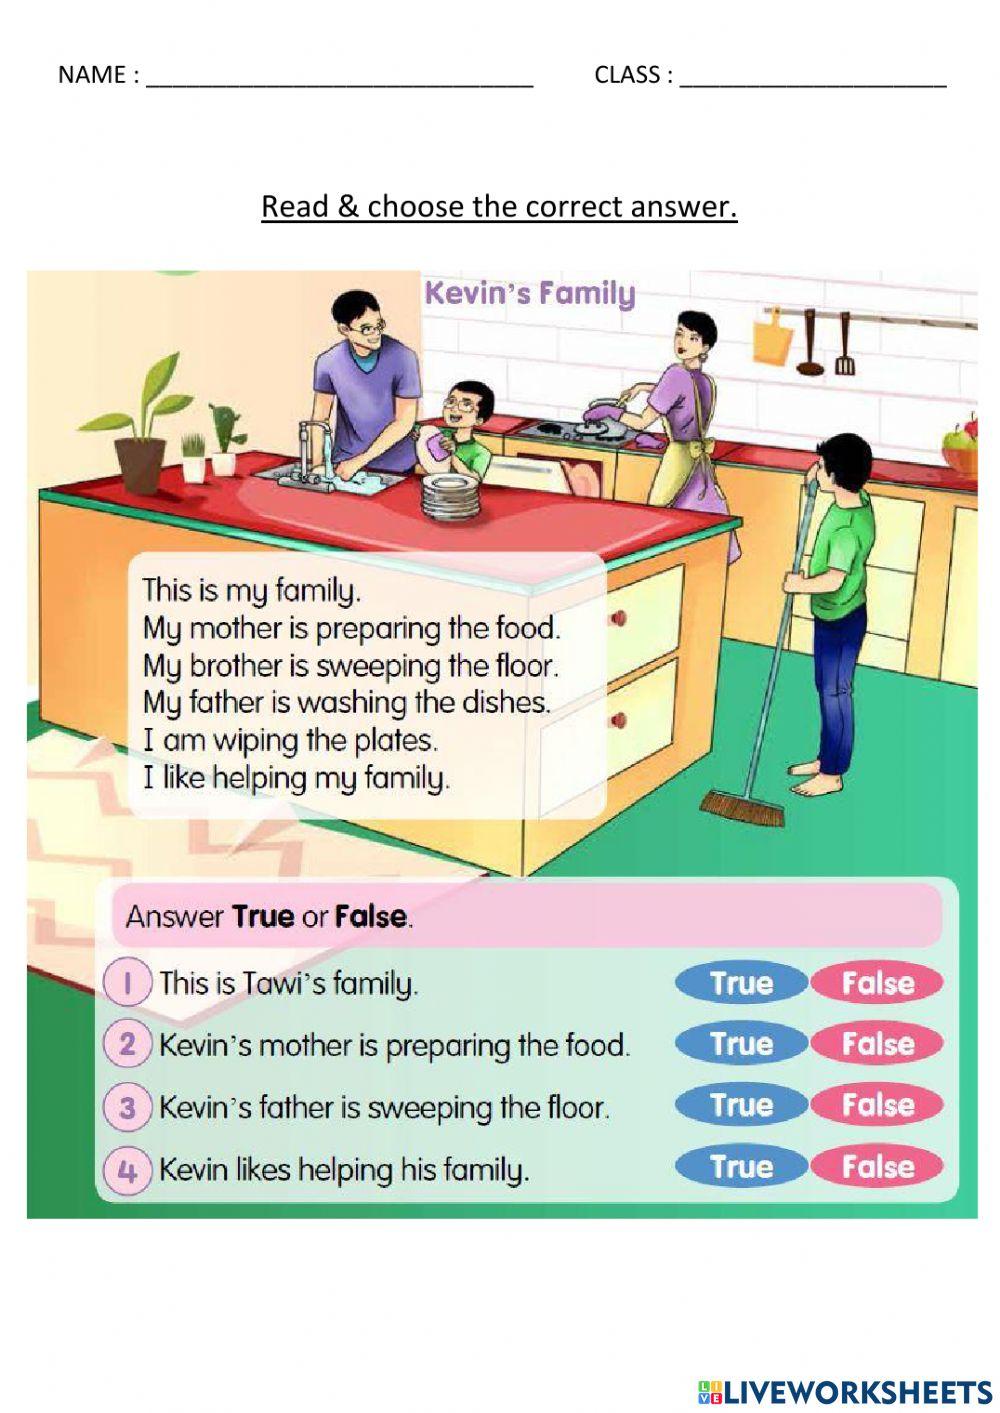 Year 4 - Kevin's Family